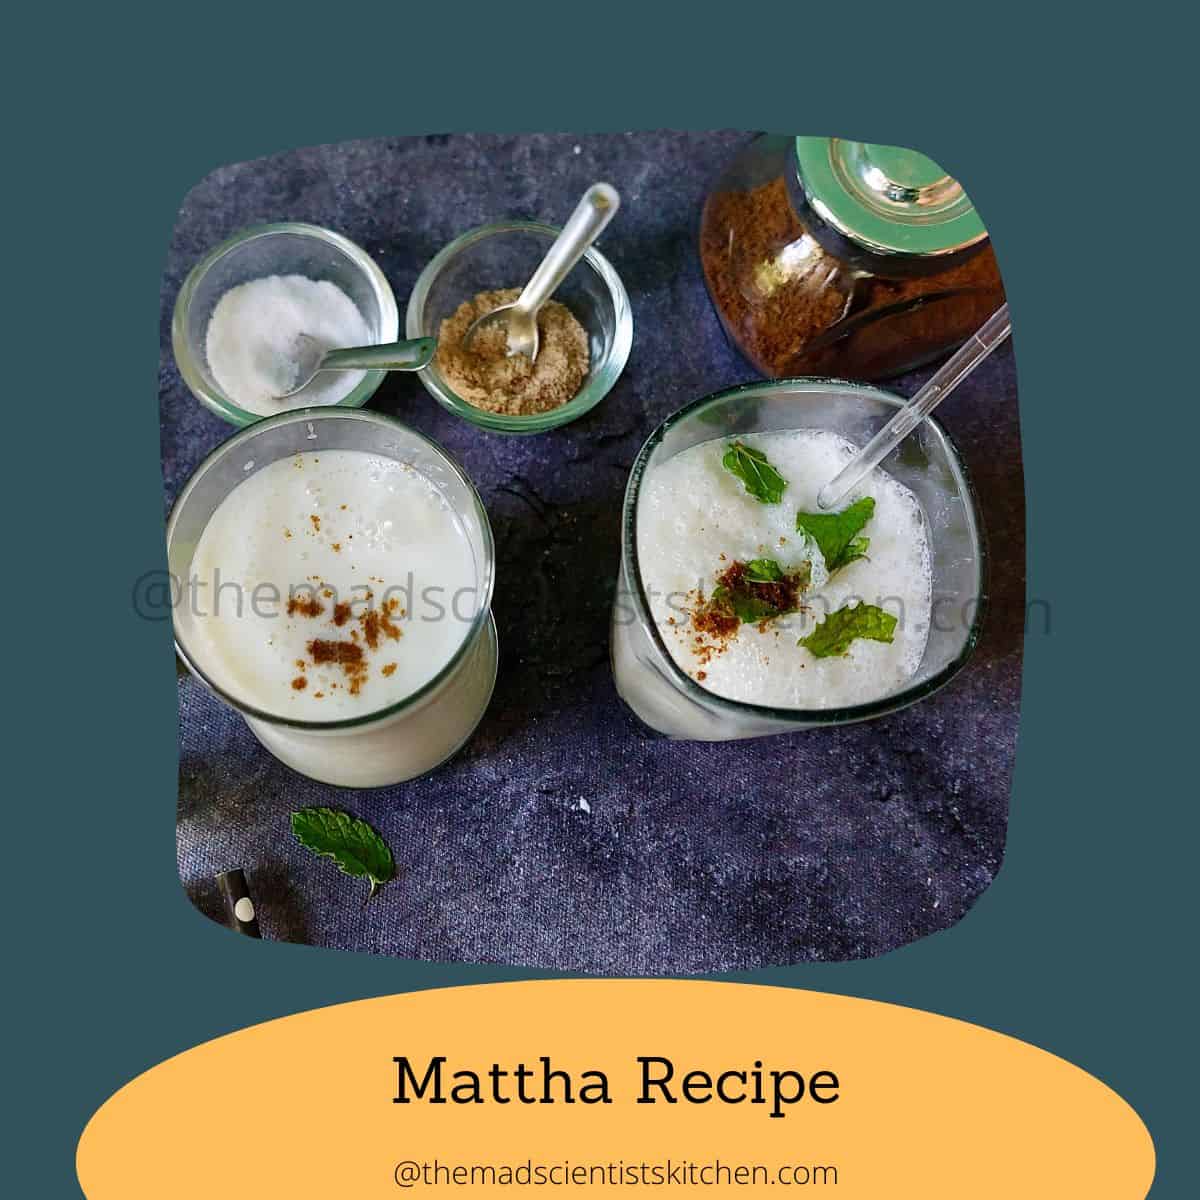 Our glasses of chilled Mattha to beat the heat